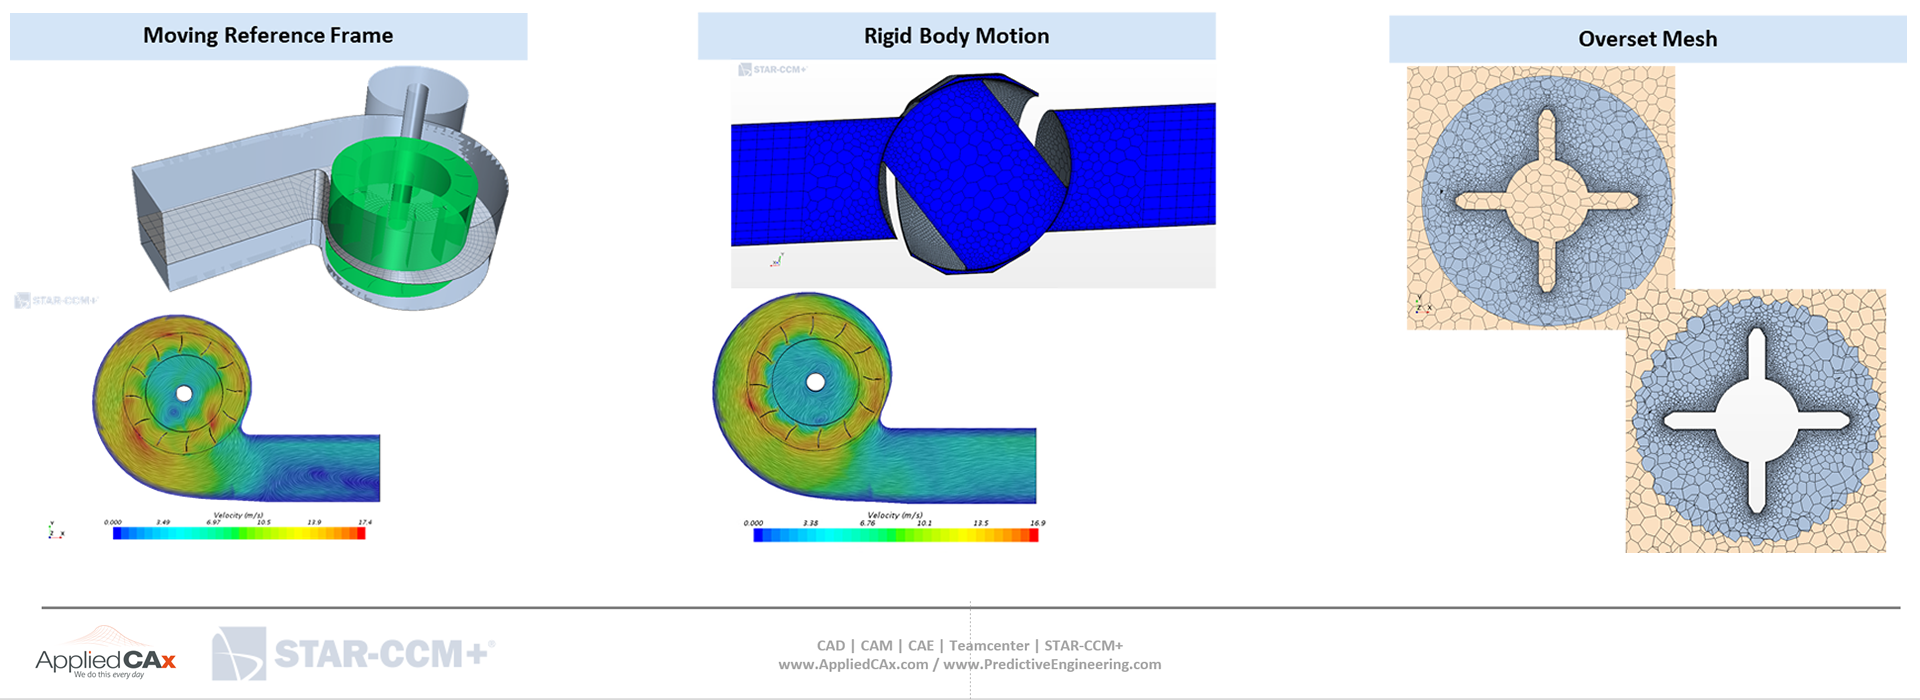 Fan characterization and Performance Analisis - Model Methodologies - CFD